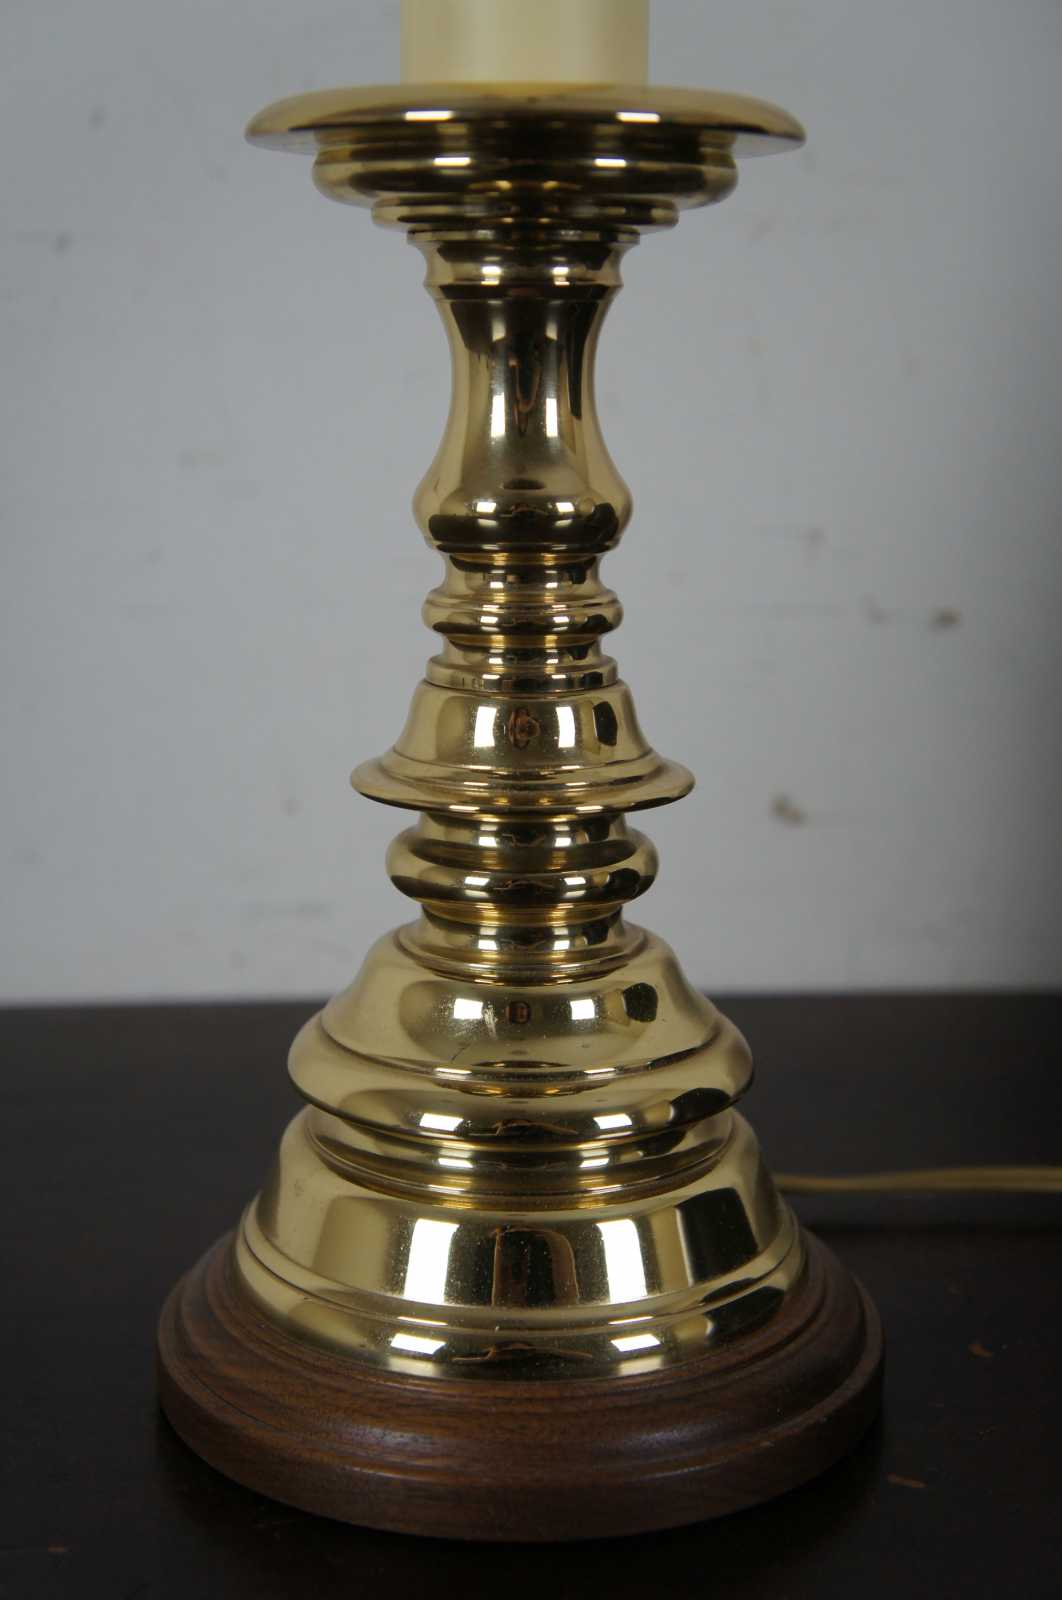 Cast brass pricket candlestick by Colonial Williamsburg – The